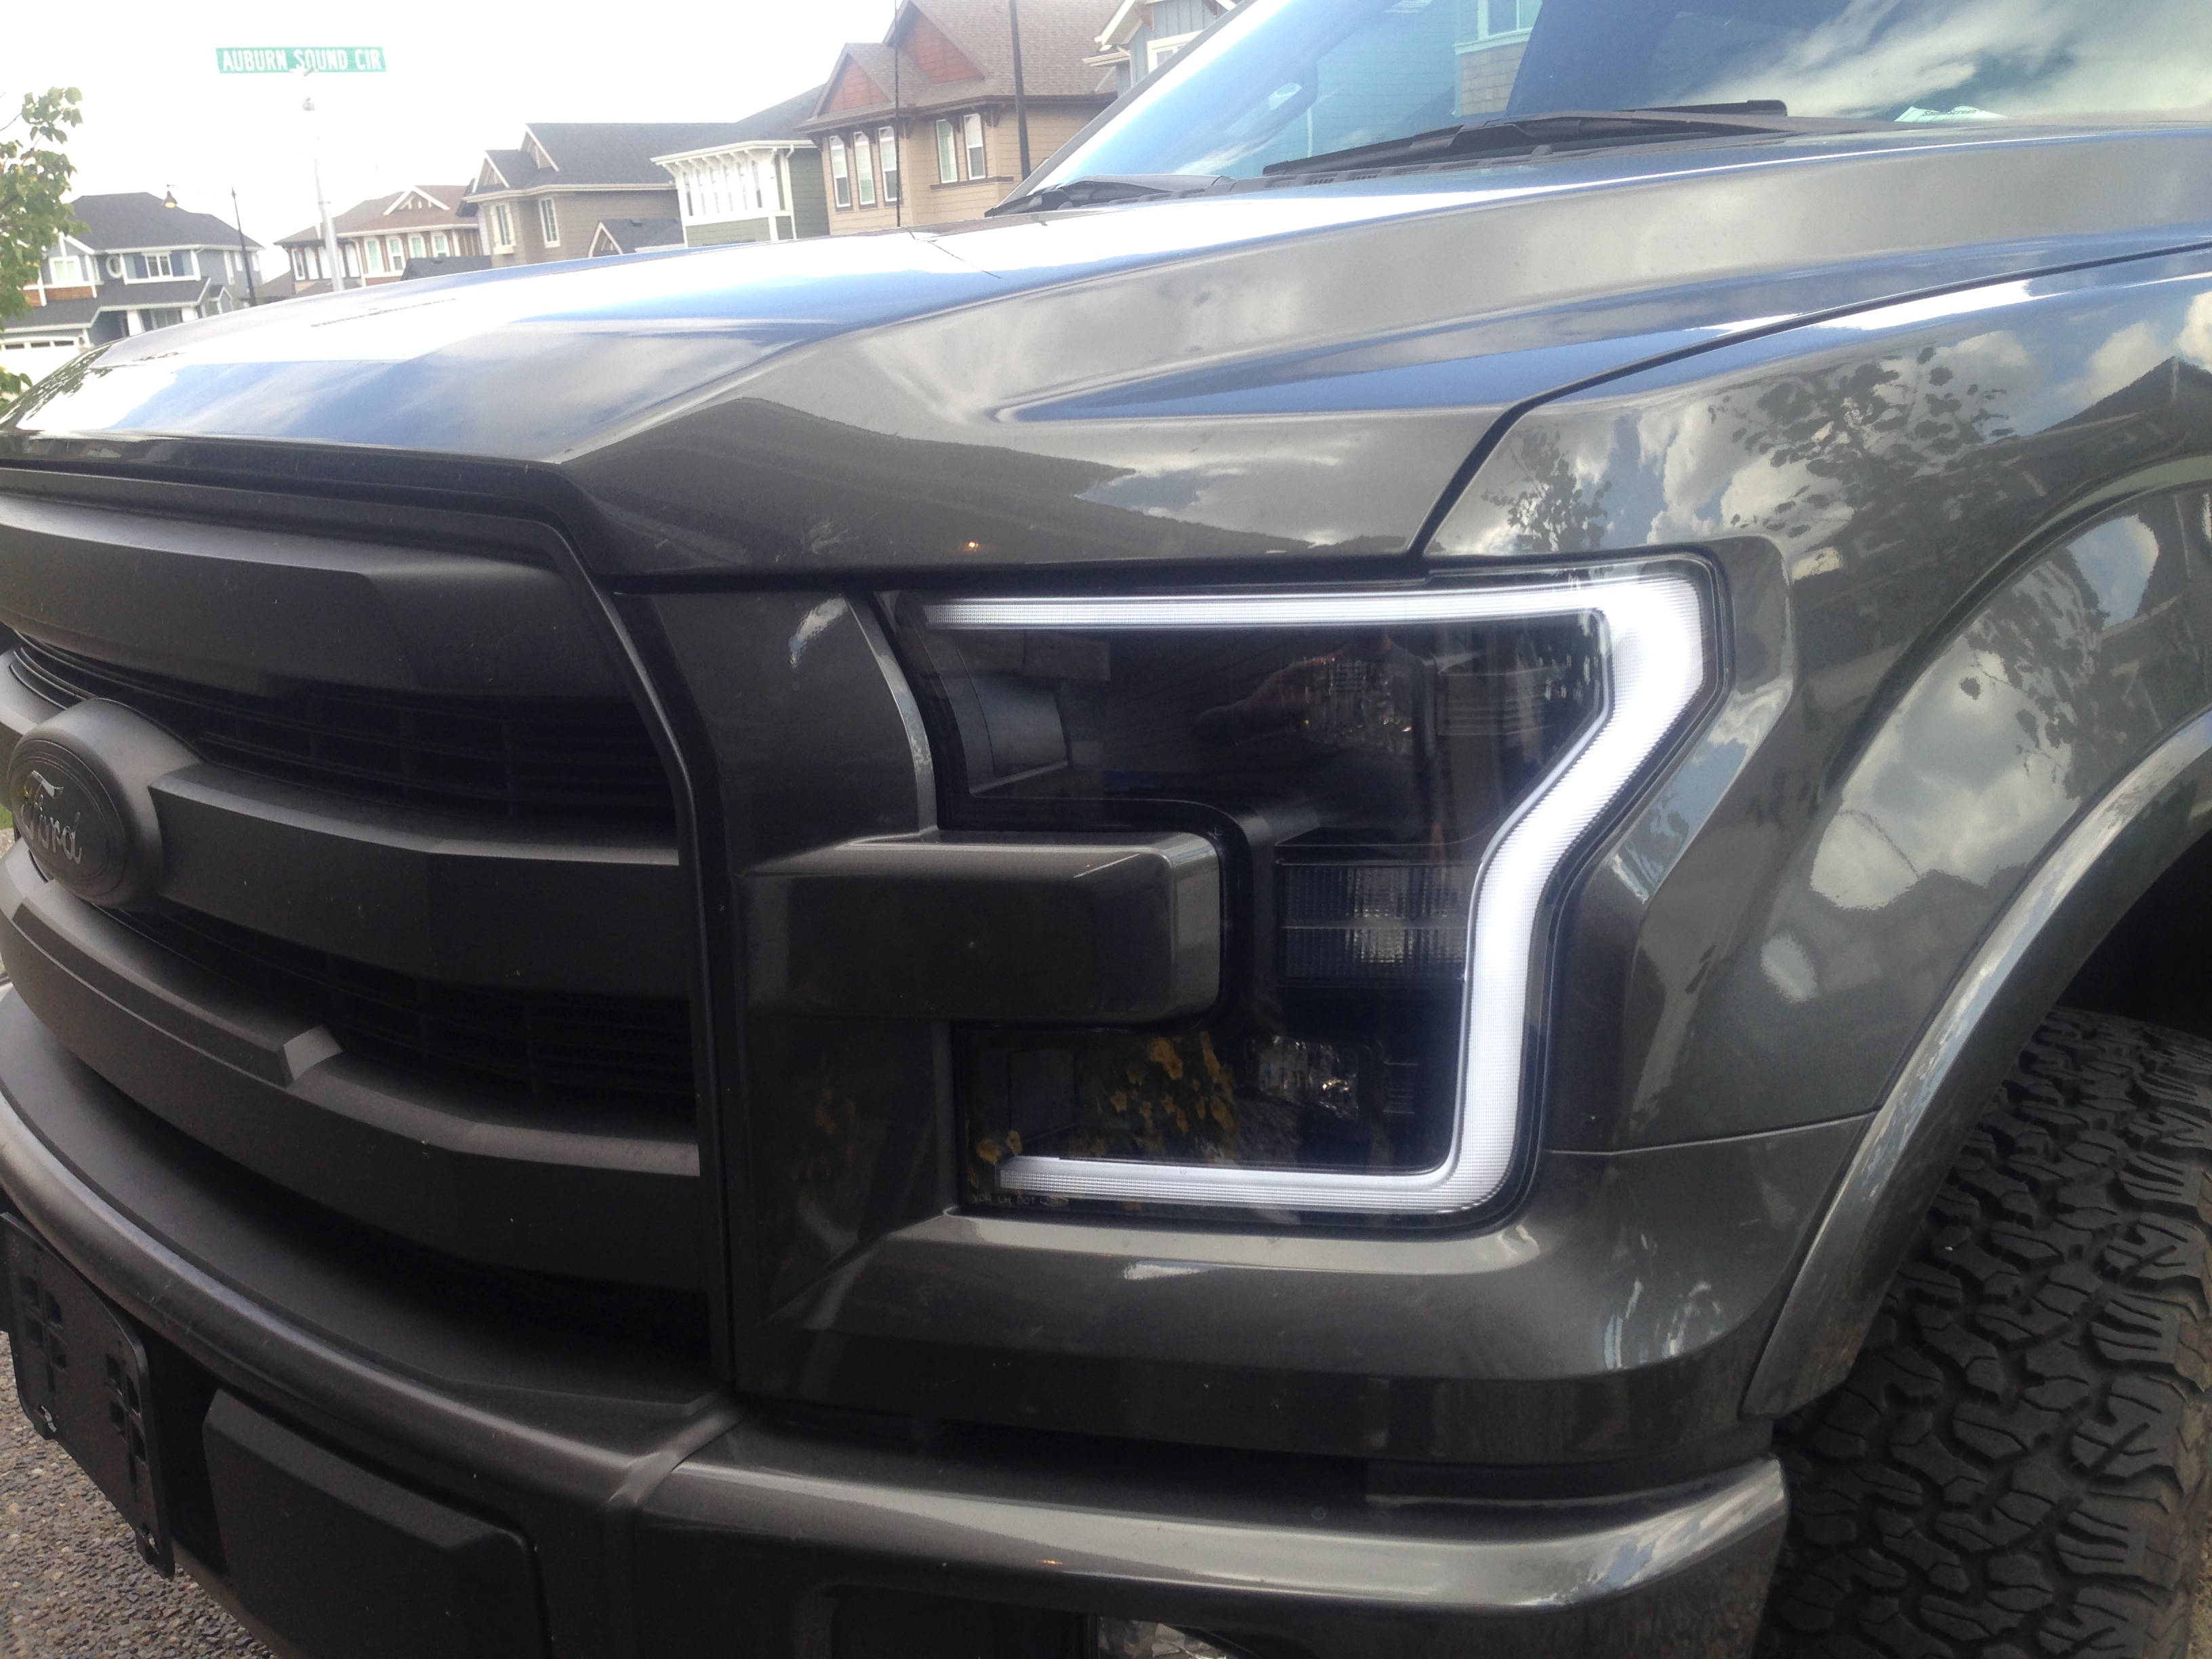 2015 F 150 Halogen To Oem Led Headlight Conversion From Raptor